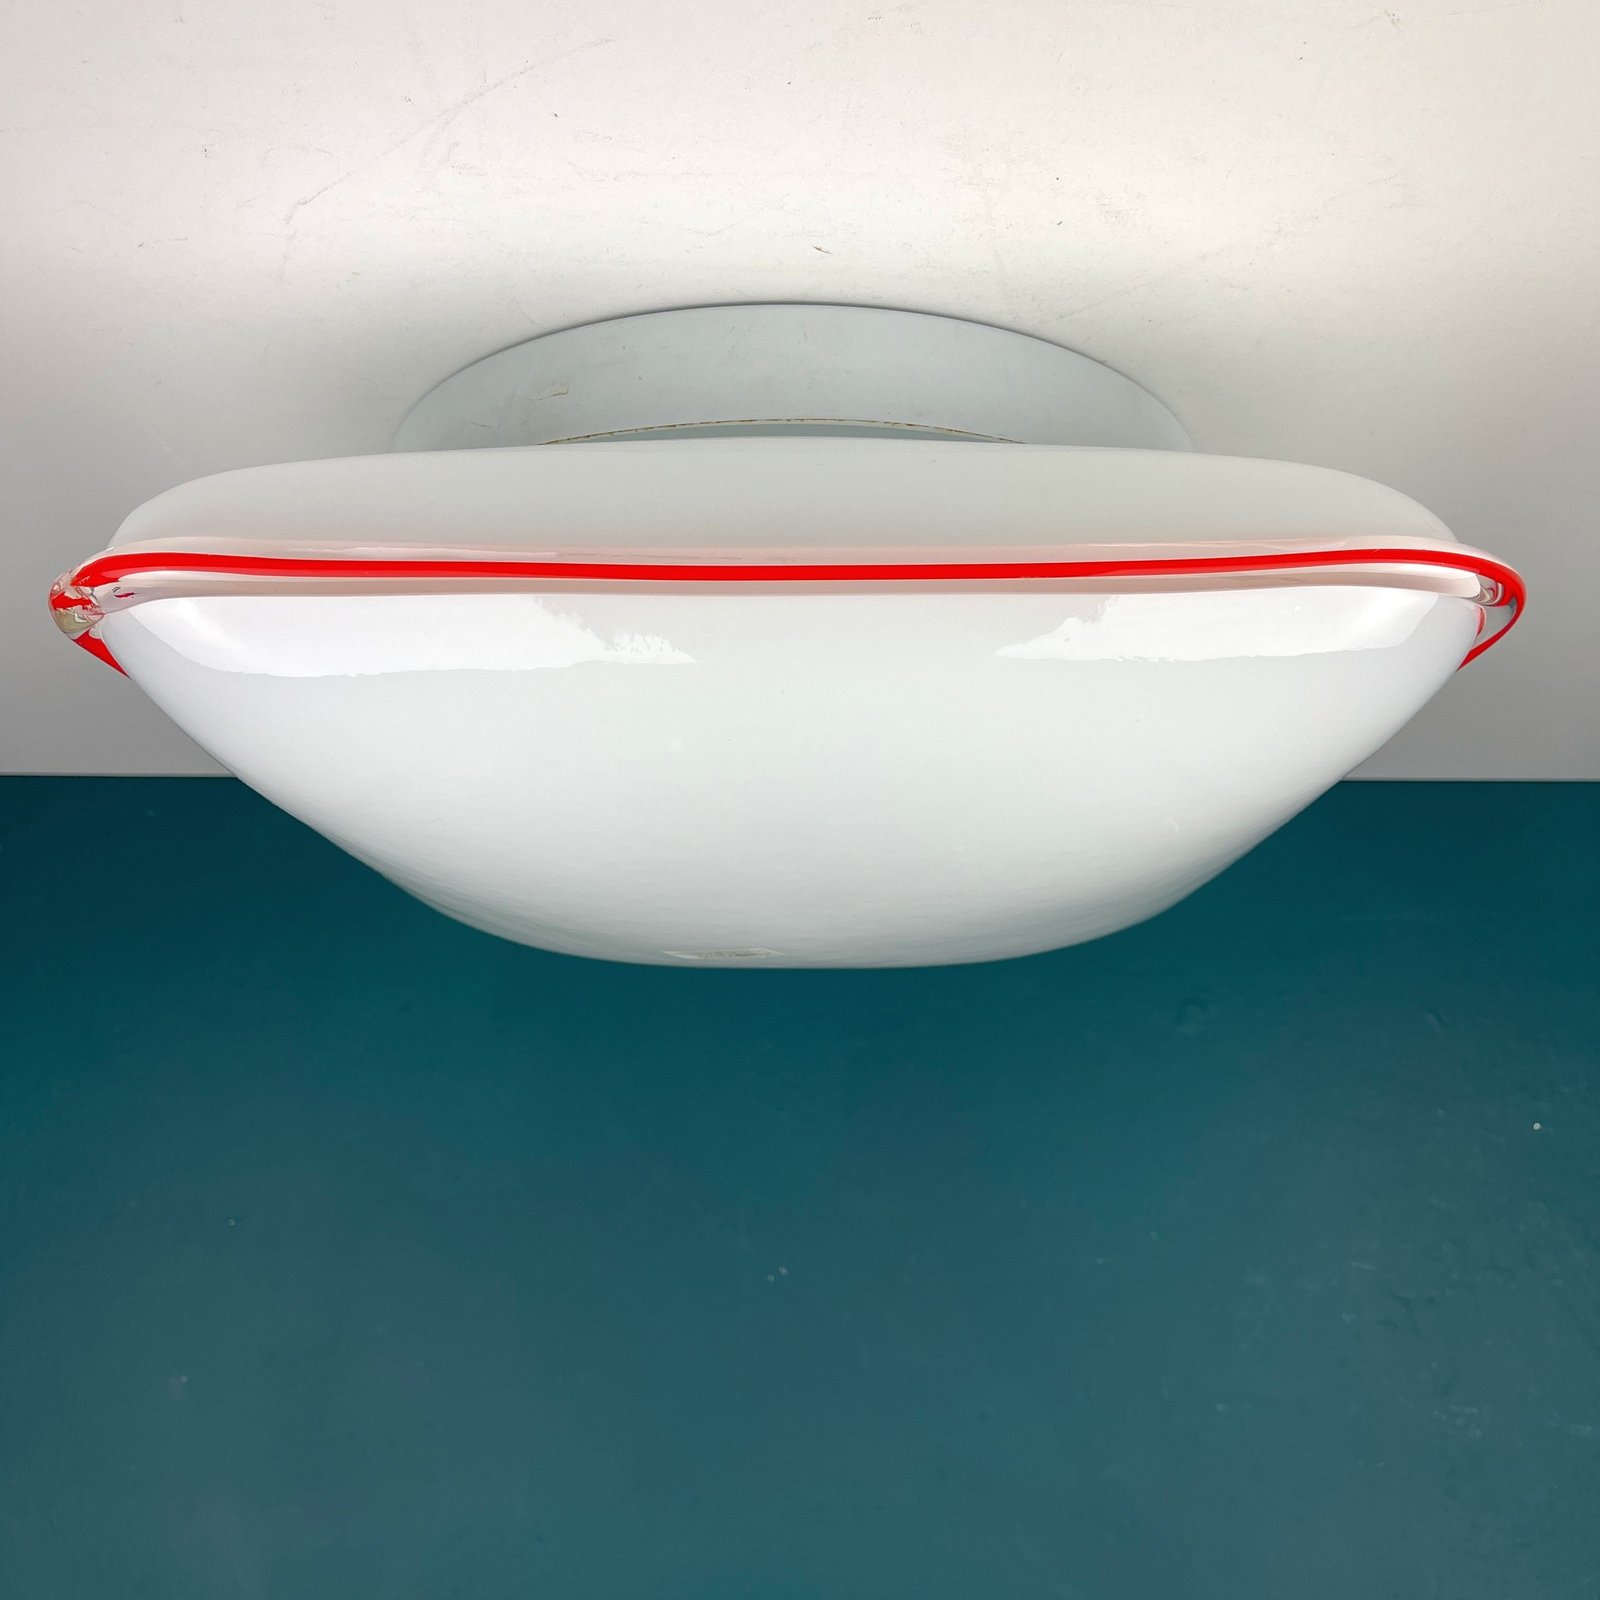 Vintage Murano glass ceiling lamp by Roberto Pamio & Renato Toso for Leucos Italy 1970s White Red Mid-century lighting